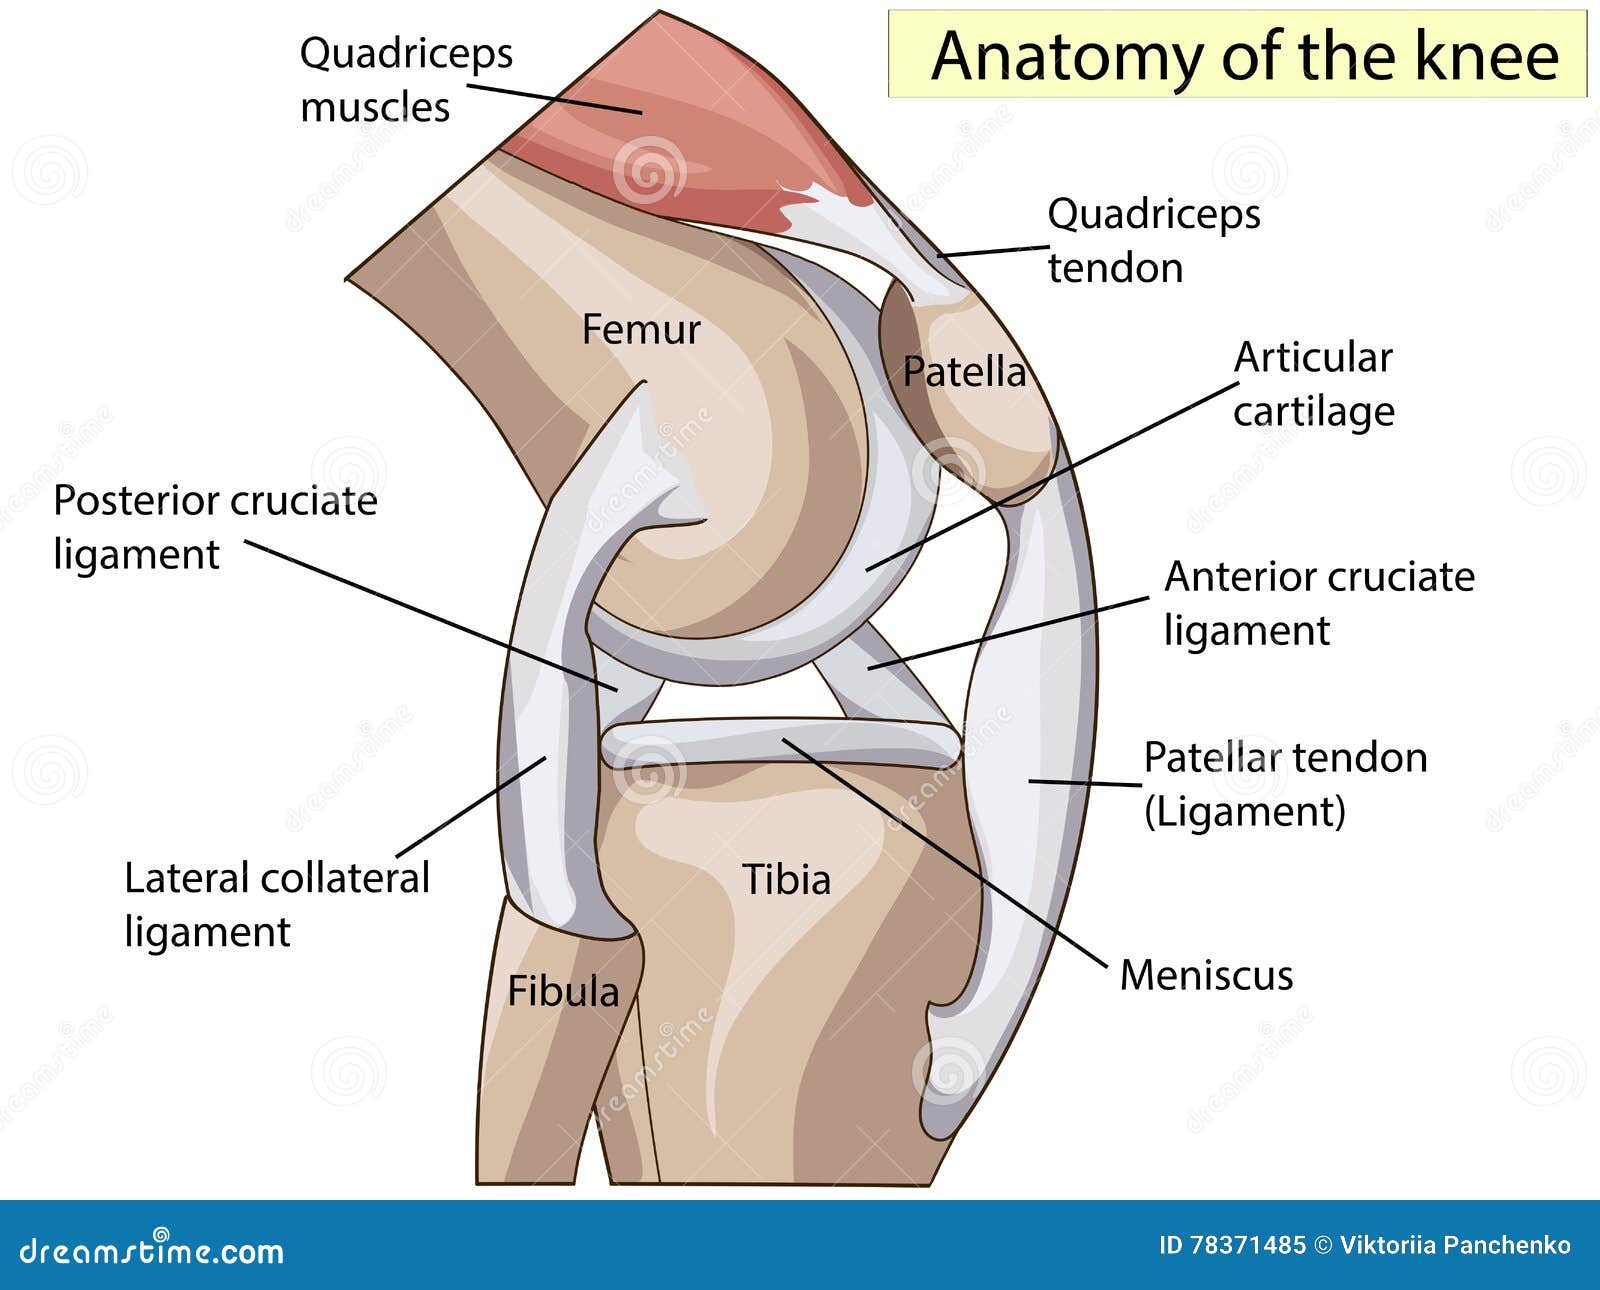 anatomy-structure-knee-joint-vector-cros